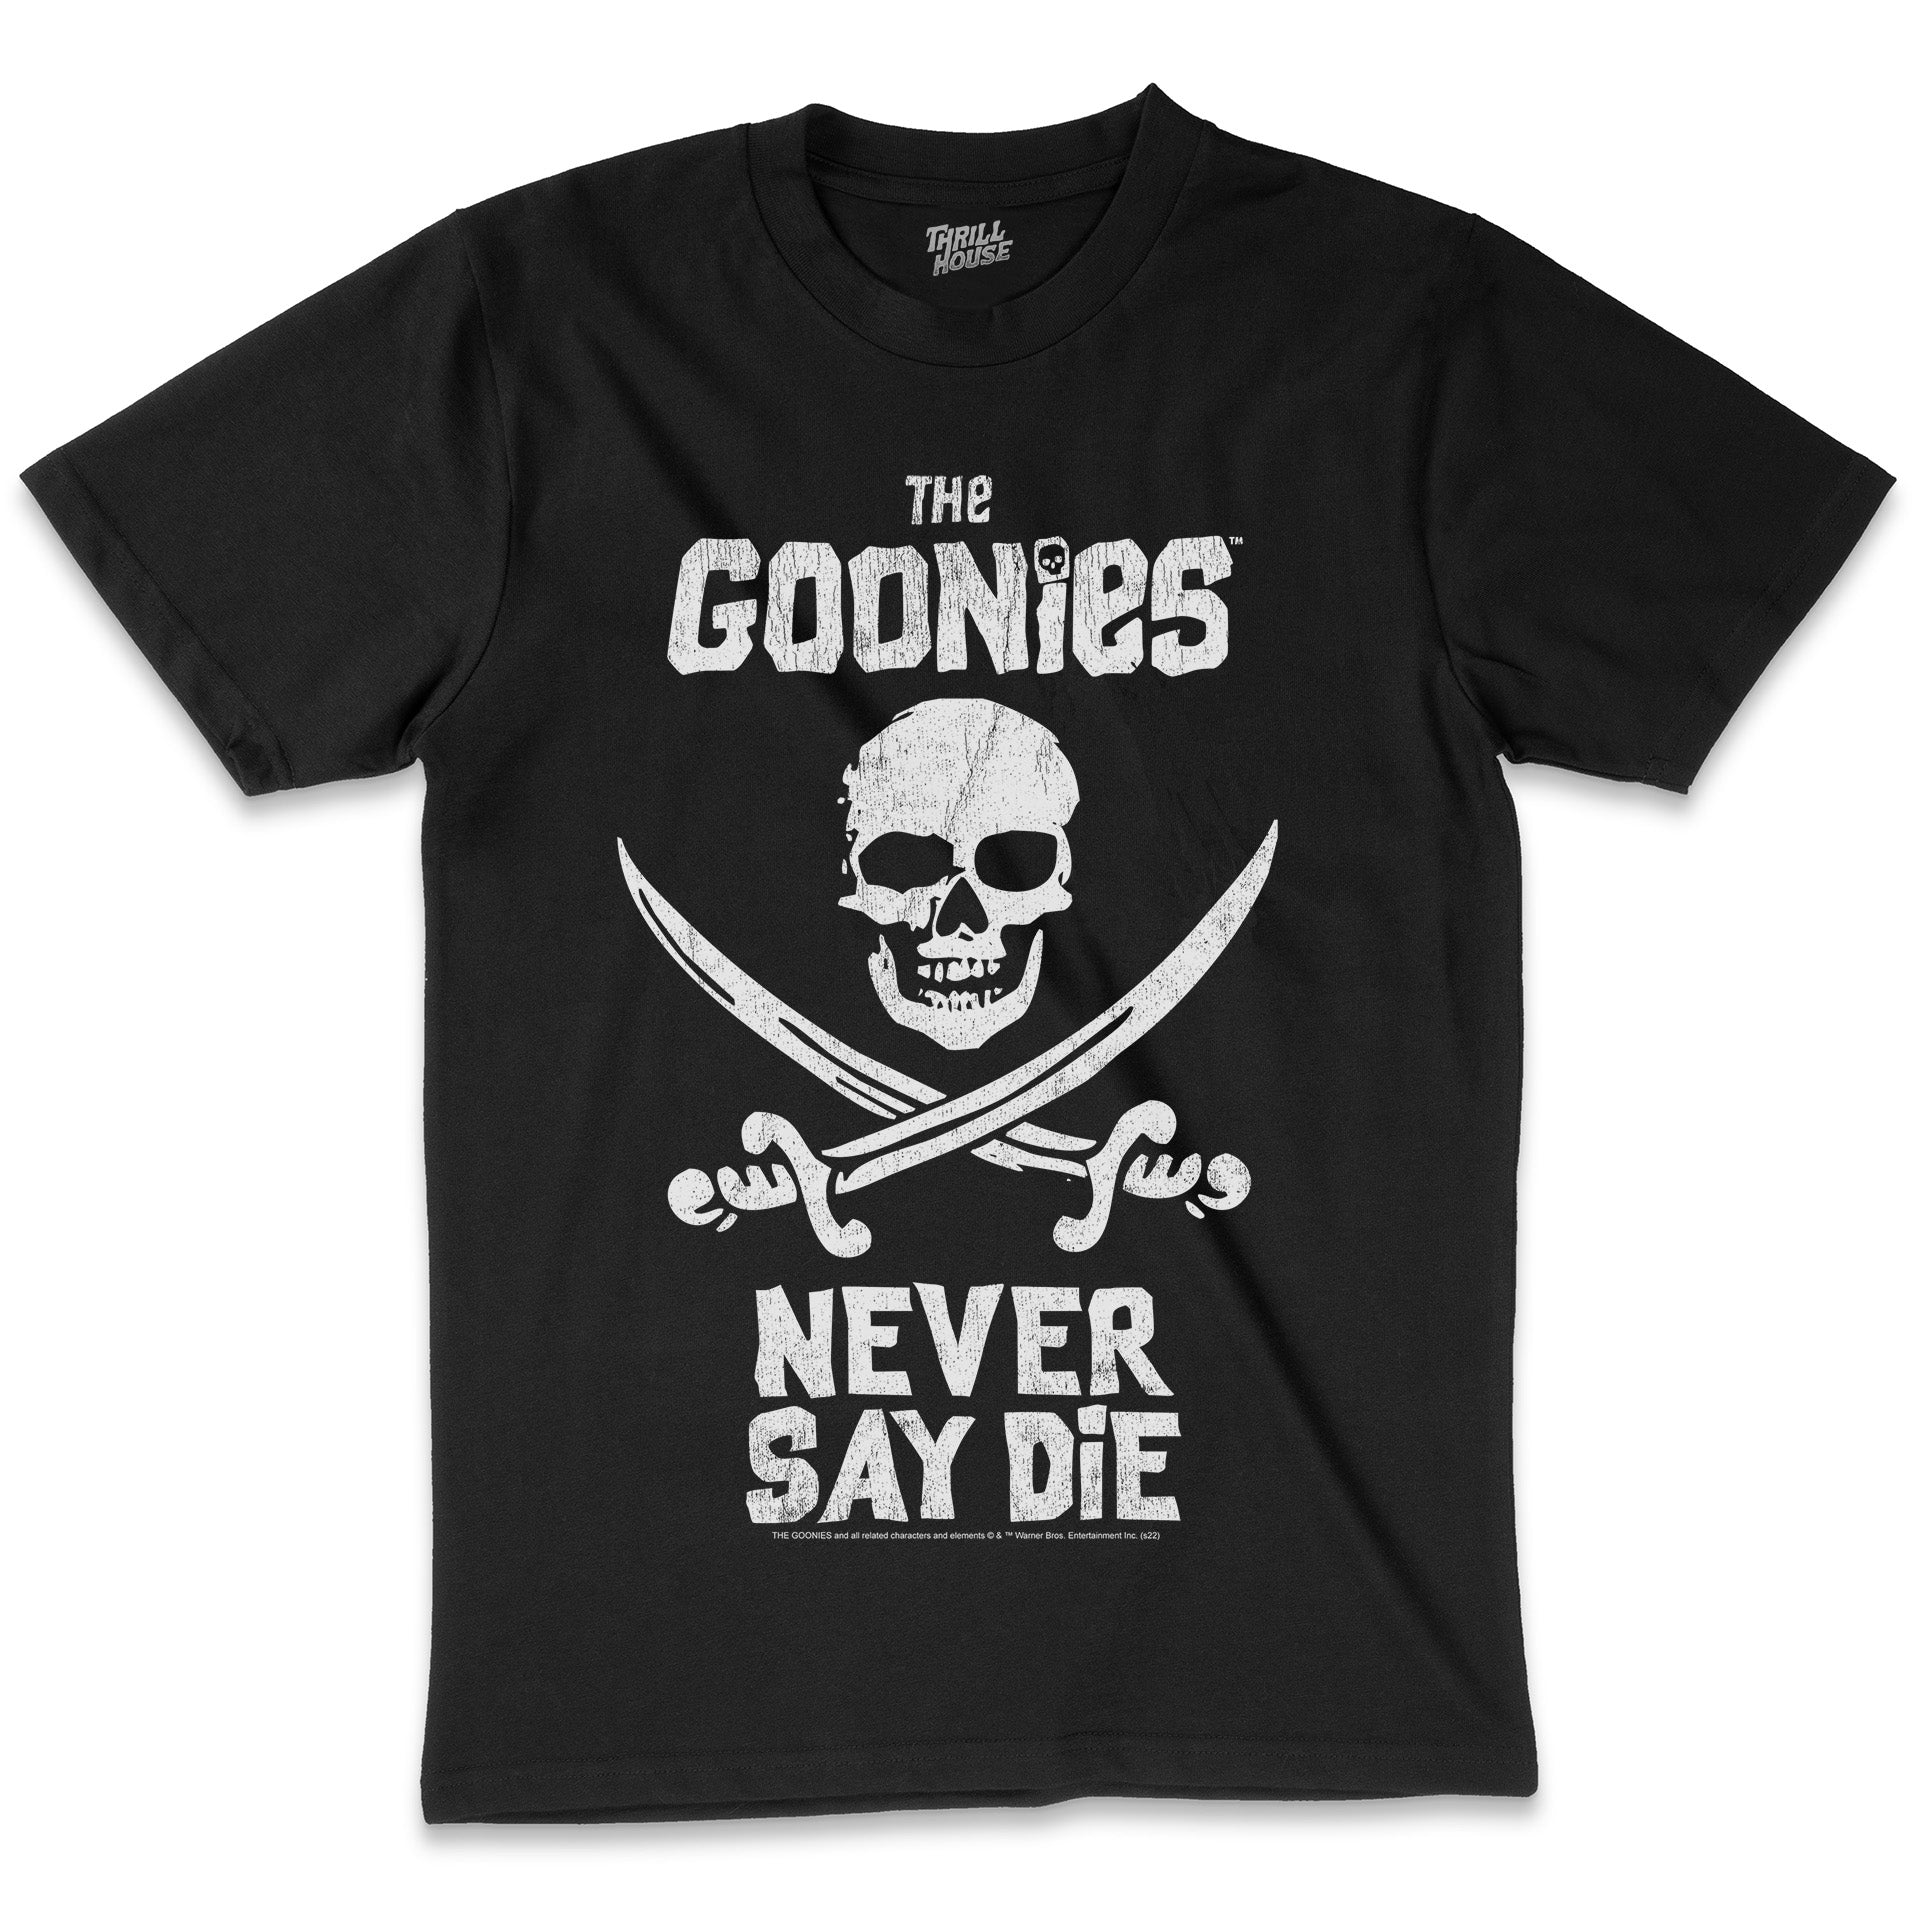 The Goonies Astoria Oregon Iconic Classic 80s Retro Vintage Adventure Comedy movie Officially Licensed Cotton T-Shirt